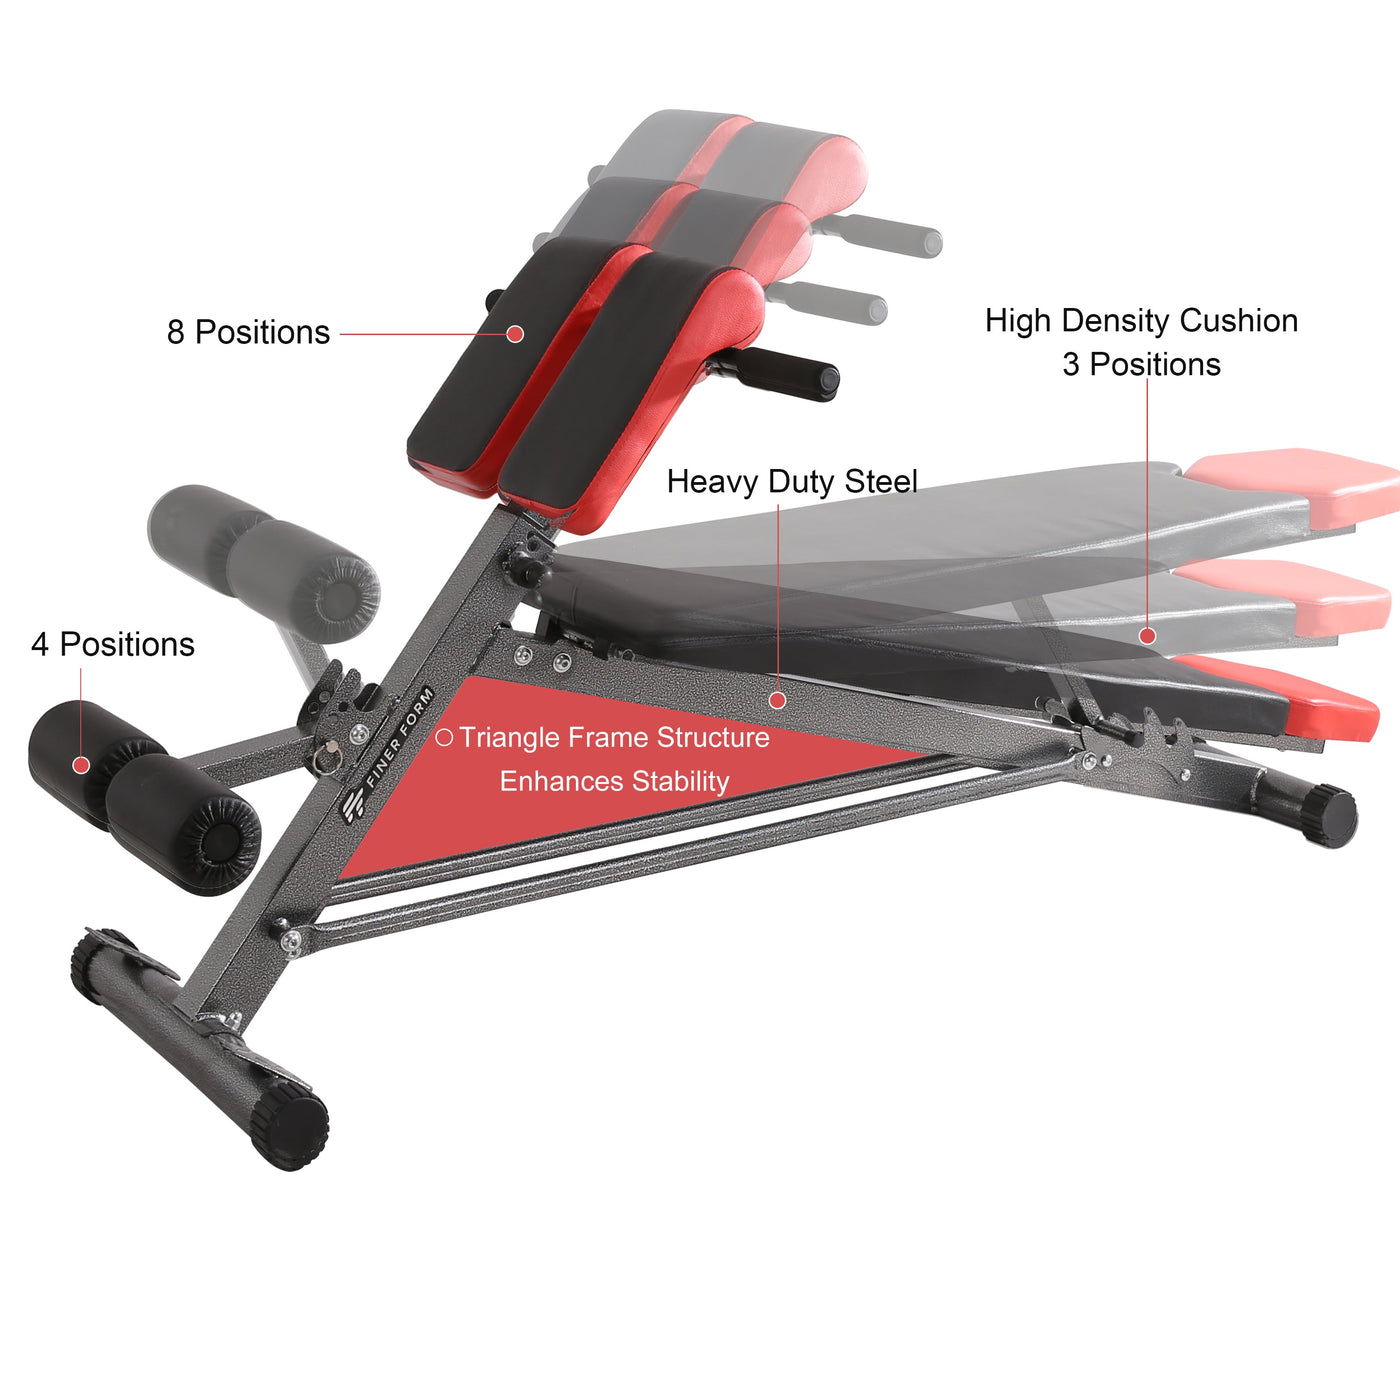 Multi-Functional Weight Bench for Full-Body Workout by Finer Form